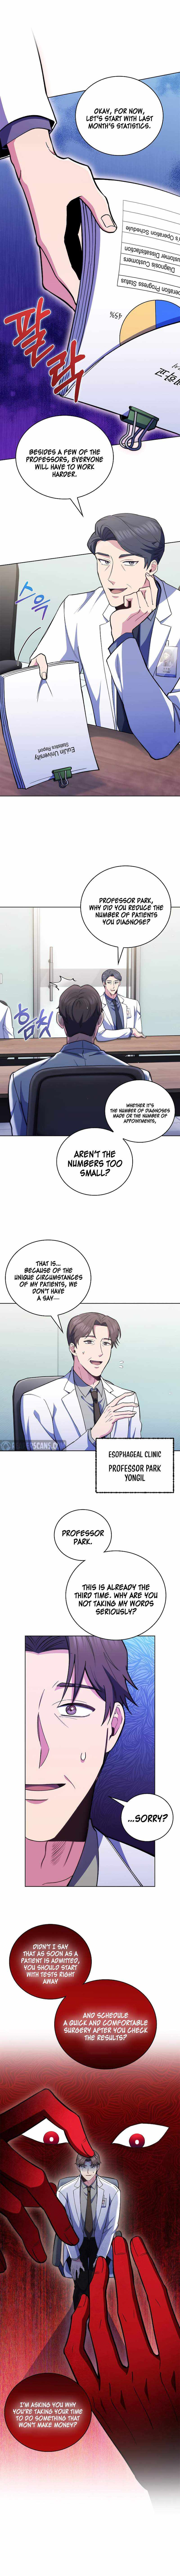 Level-Up Doctor (Manhwa) - Page 5